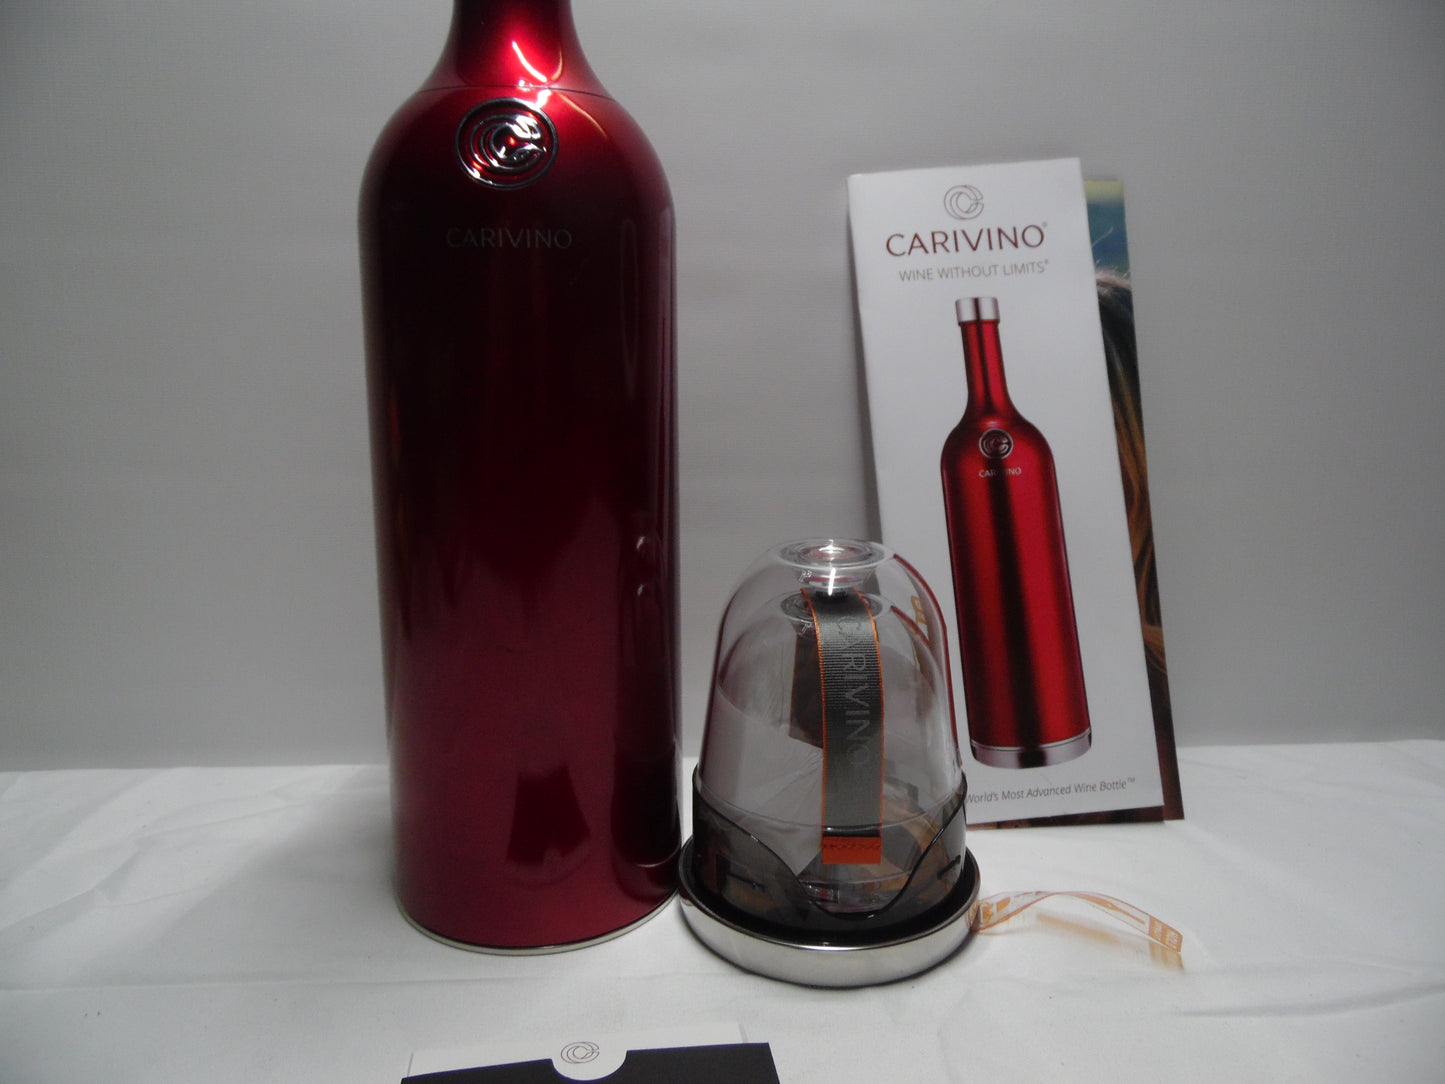 Insulated Stainless Steel Wine Canteen, 24-hour Temperature Retention, Shatterproof Tumbler Glasses with Magnetic Stems and Corkscrew